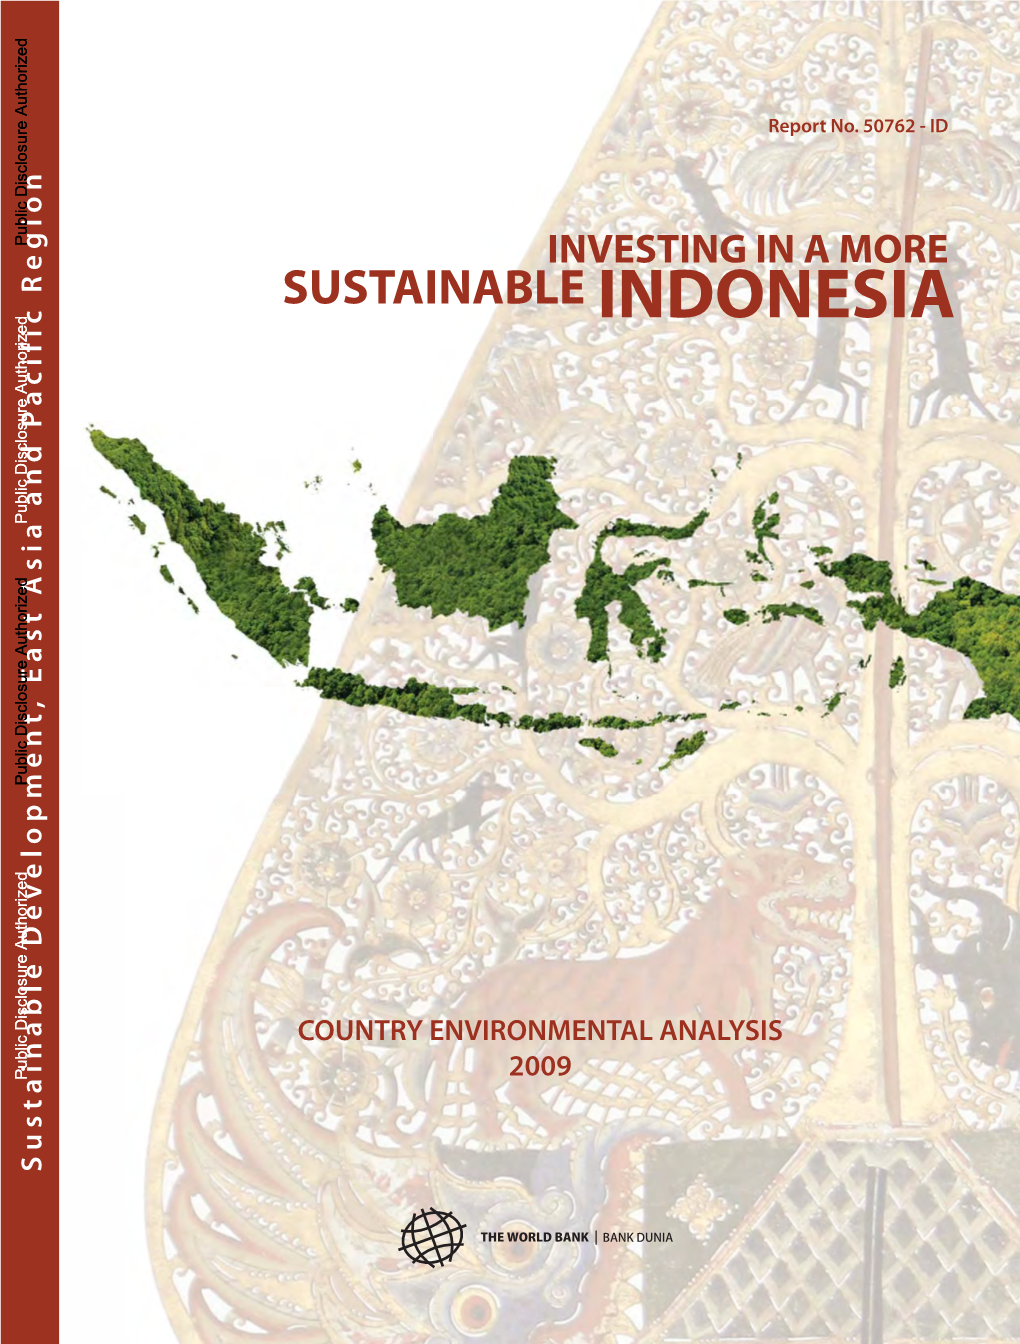 COUNTRY ENVIRONMENTAL ANALYSIS 2009 INVESTING INAMORE INDONESIA Report No.Report 50762-ID